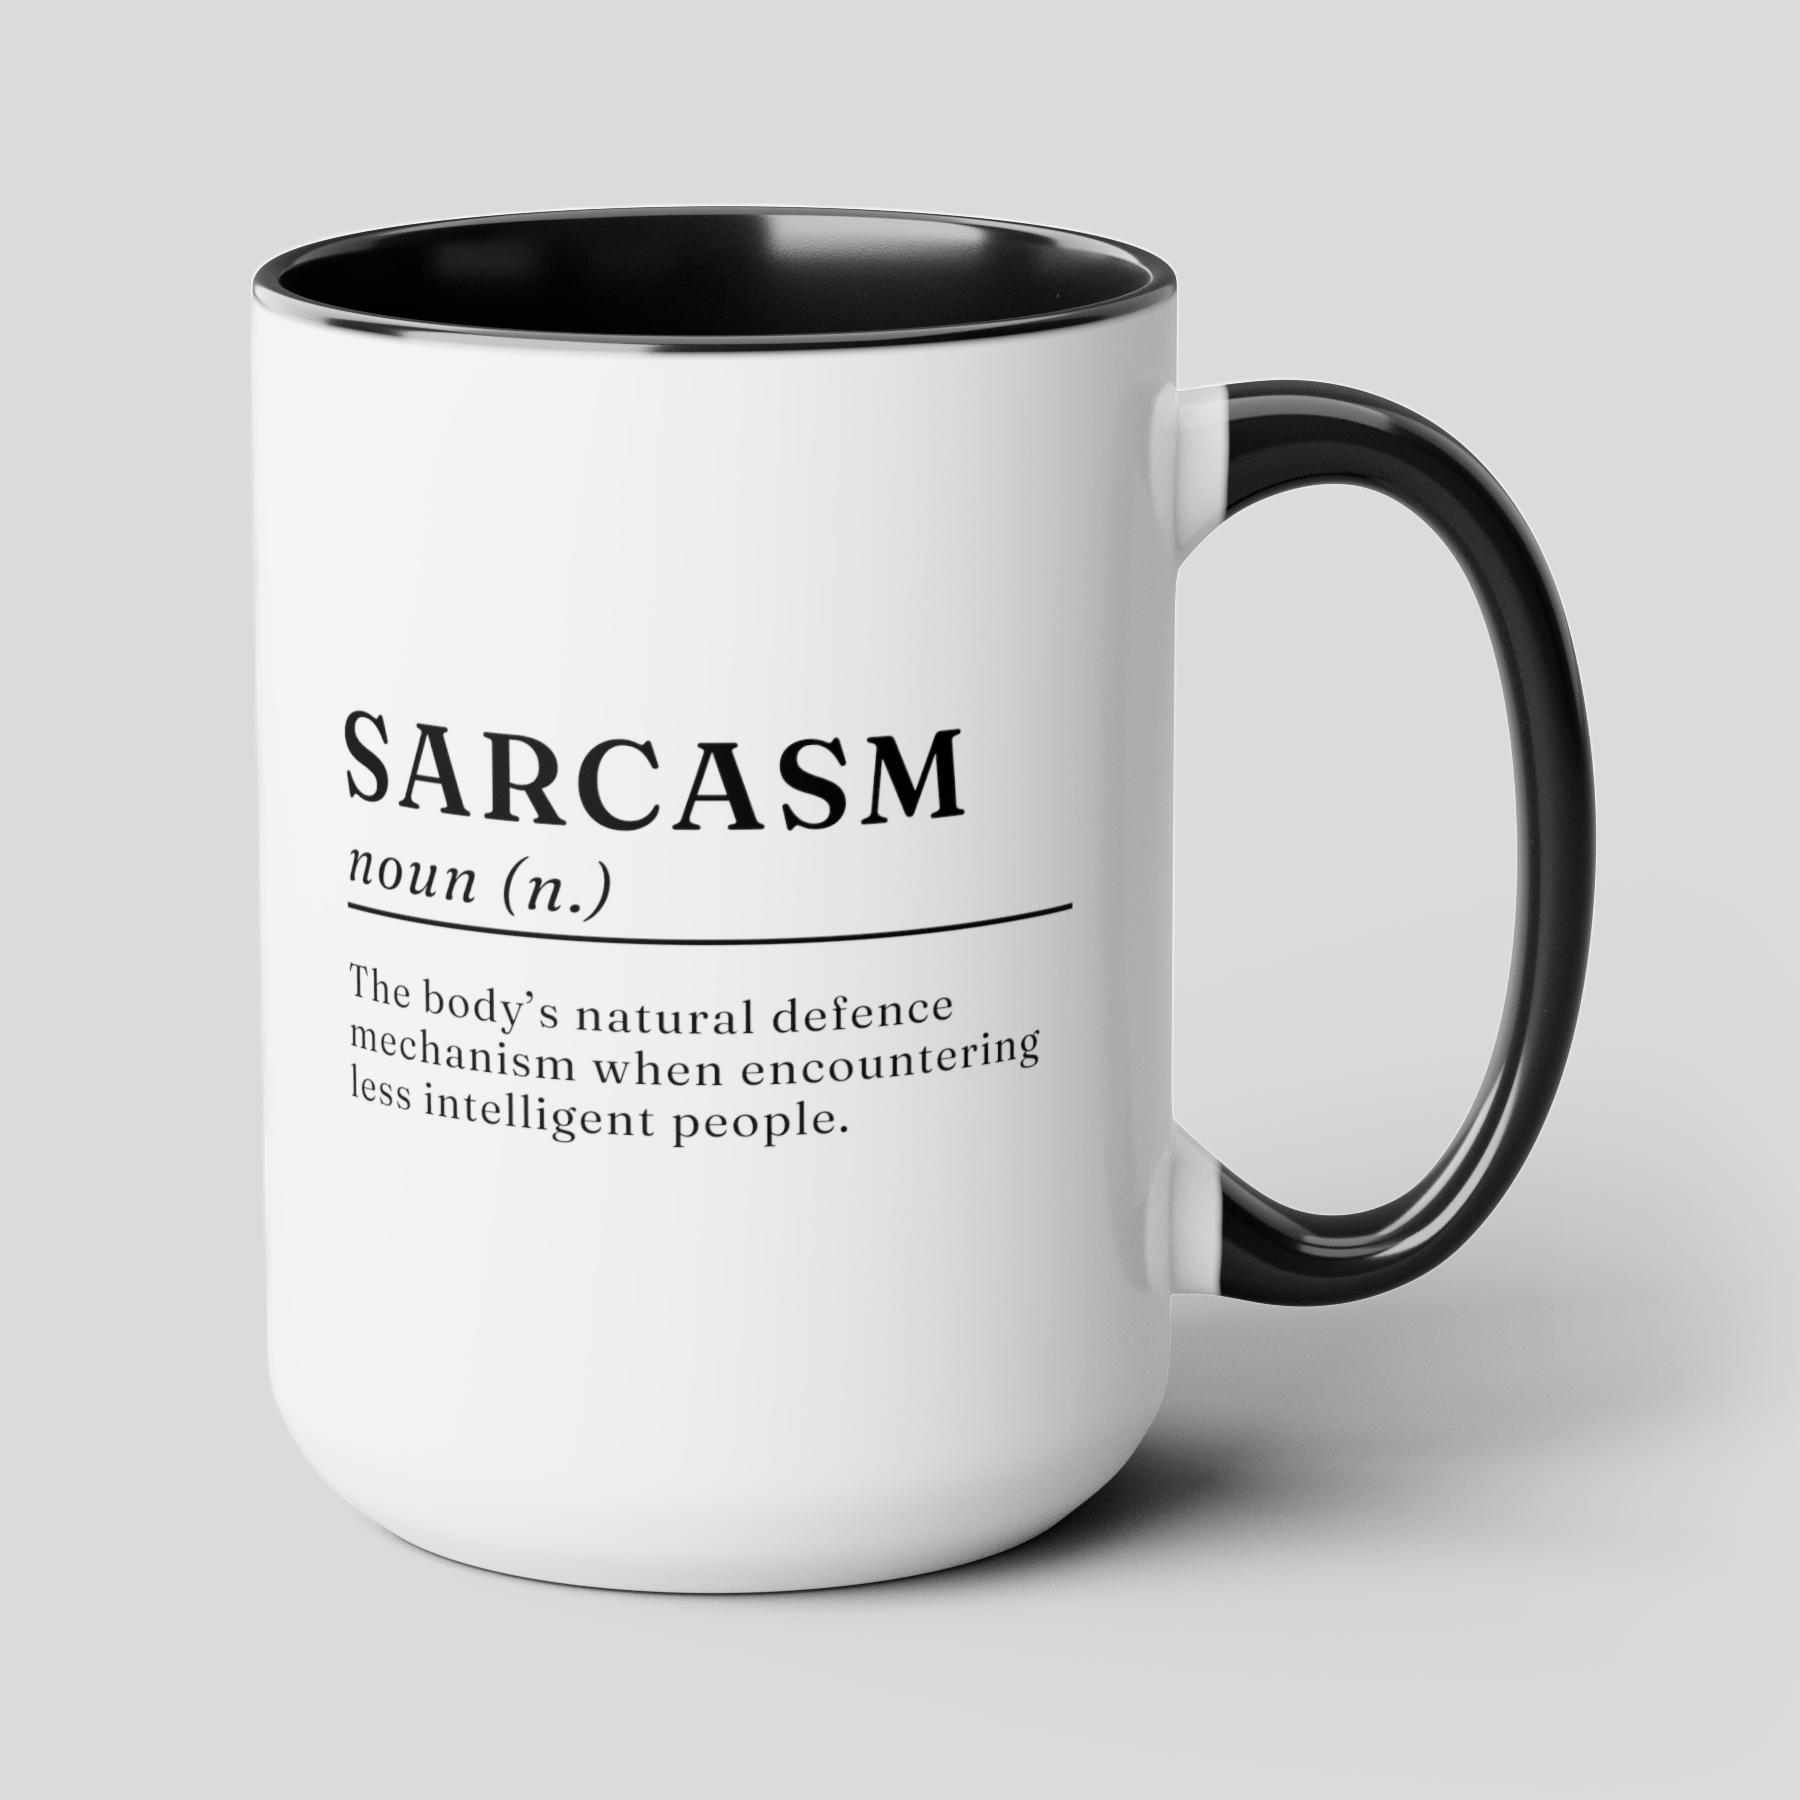 Sarcasm Definition 15oz white with black accent funny large coffee mug gift for friend dictionary novelty joke sarcastic sassy snarky meaning waveywares wavey wares wavywares wavy wares cover